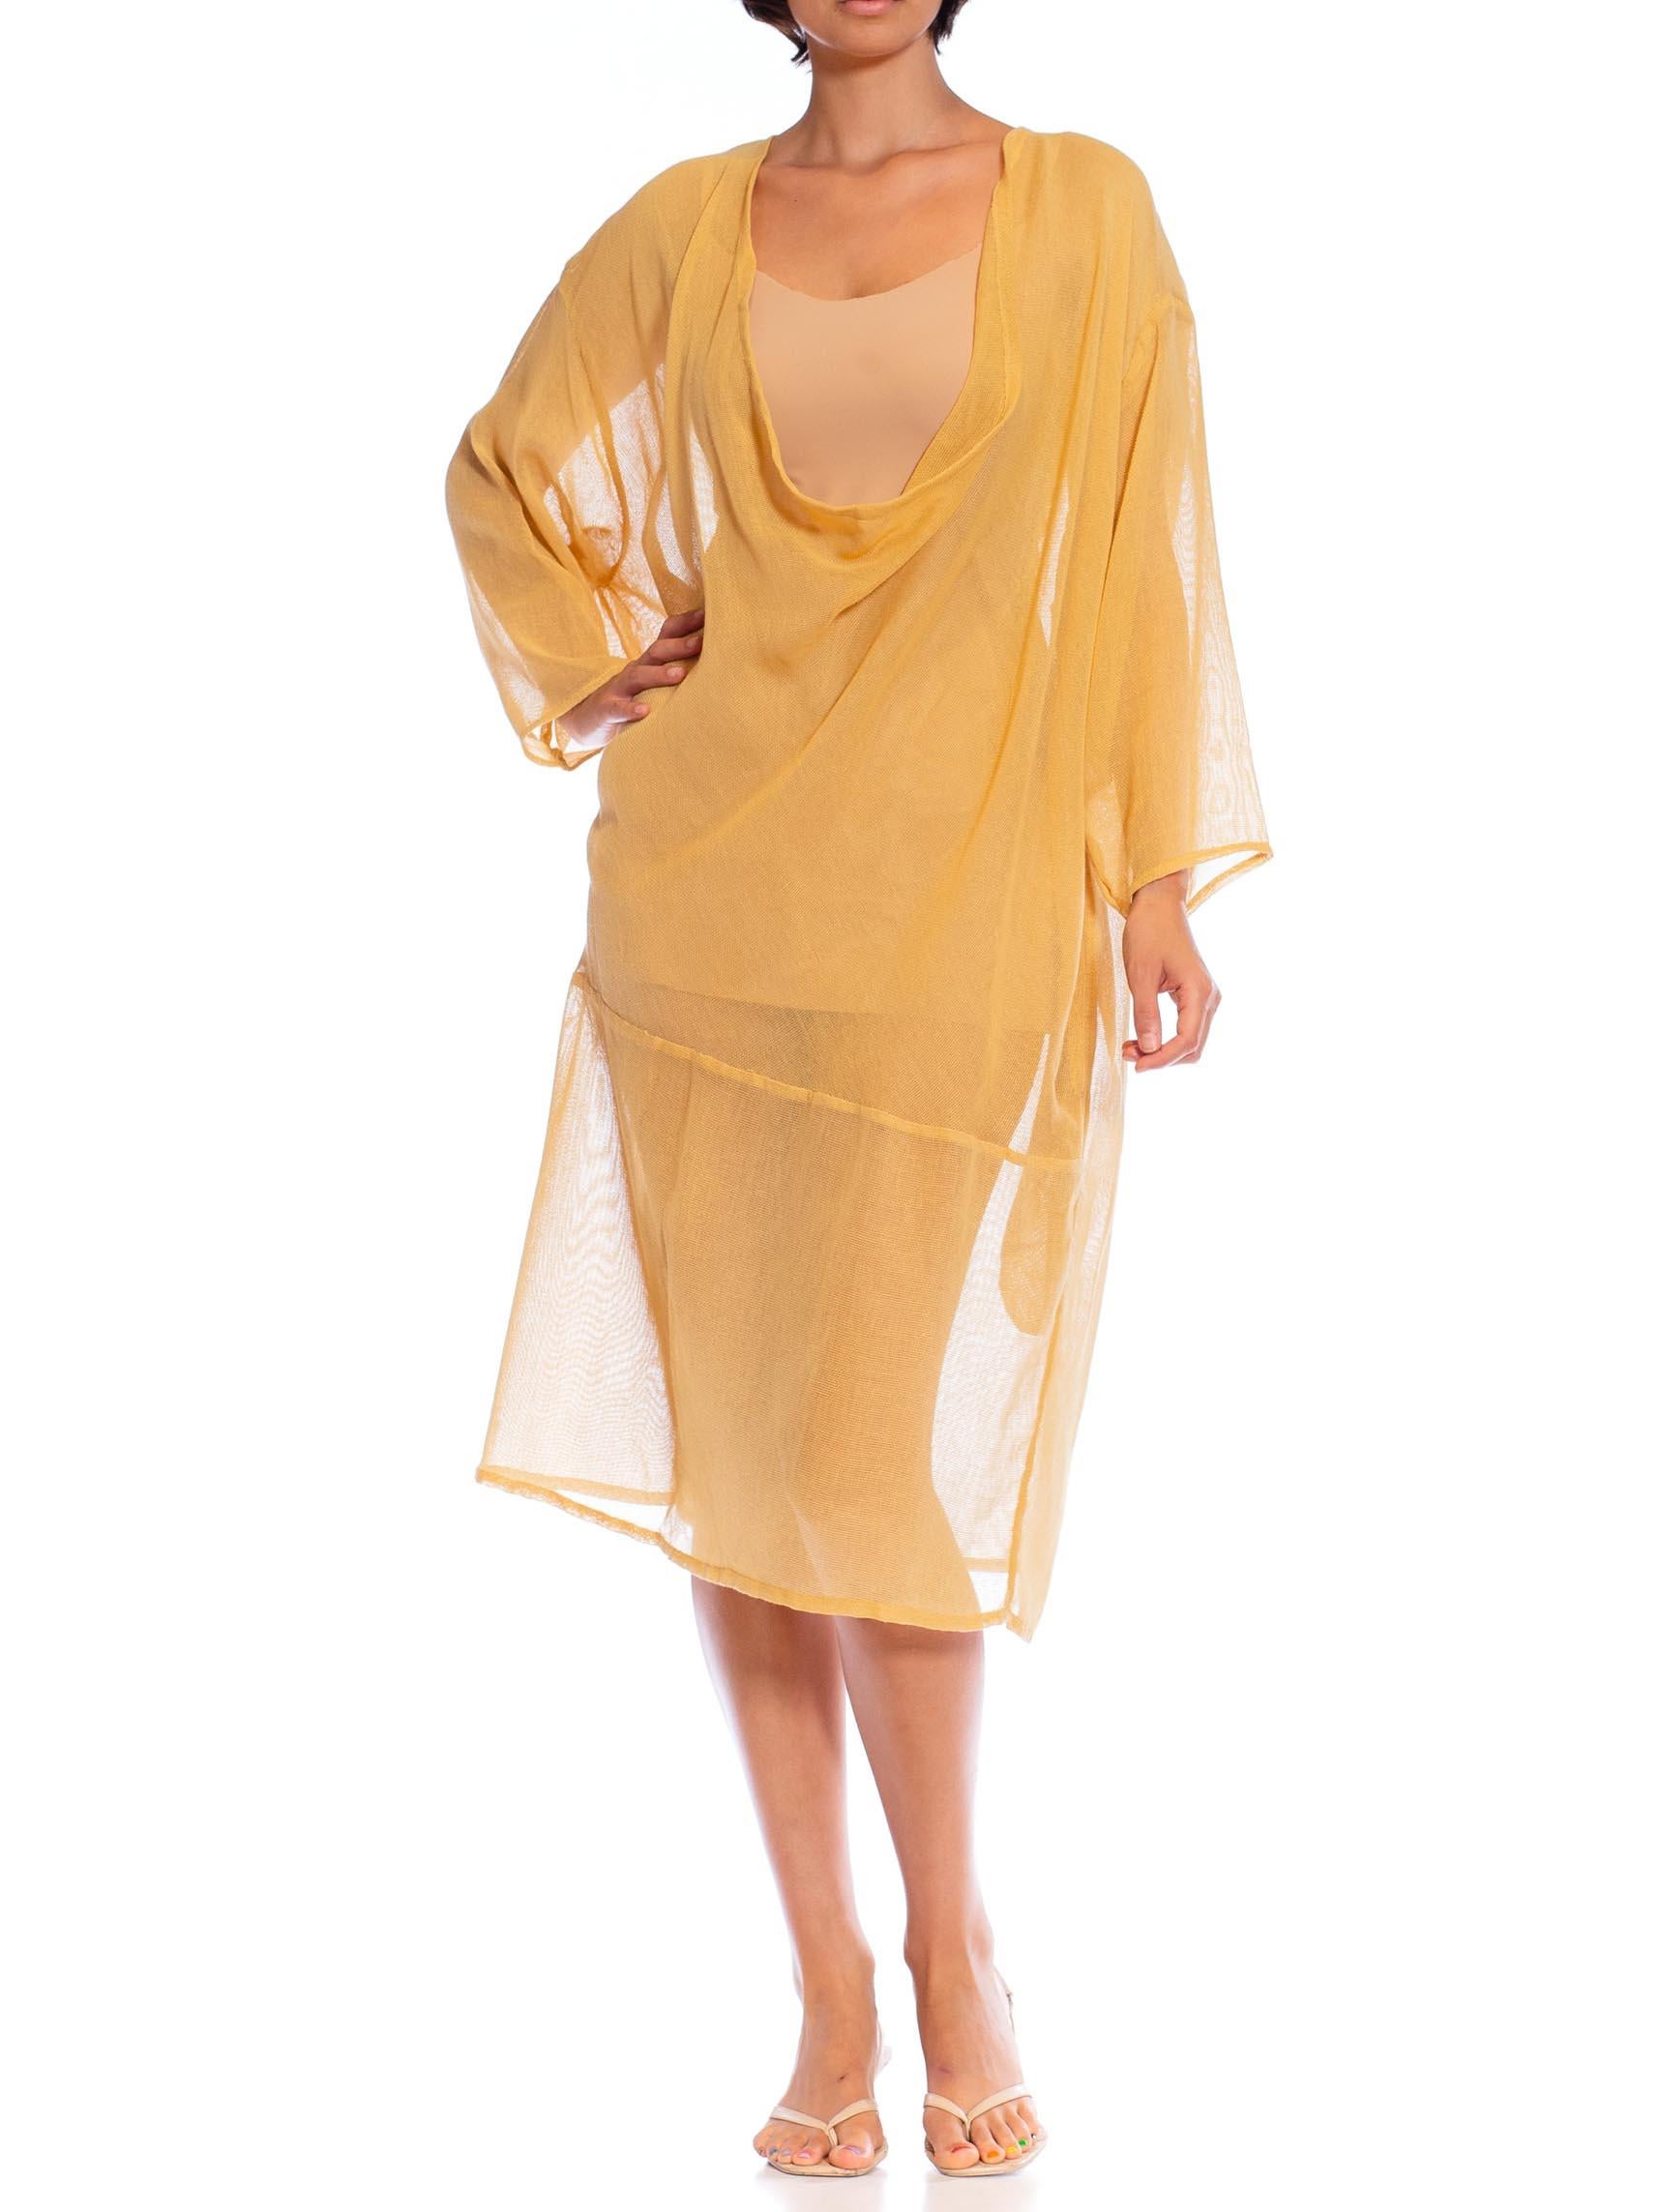 MORPHEW COLLECTION Mustard Yellow Cotton Blend Gauze Unisex Cowl-Neck Tunic Top For Sale 2